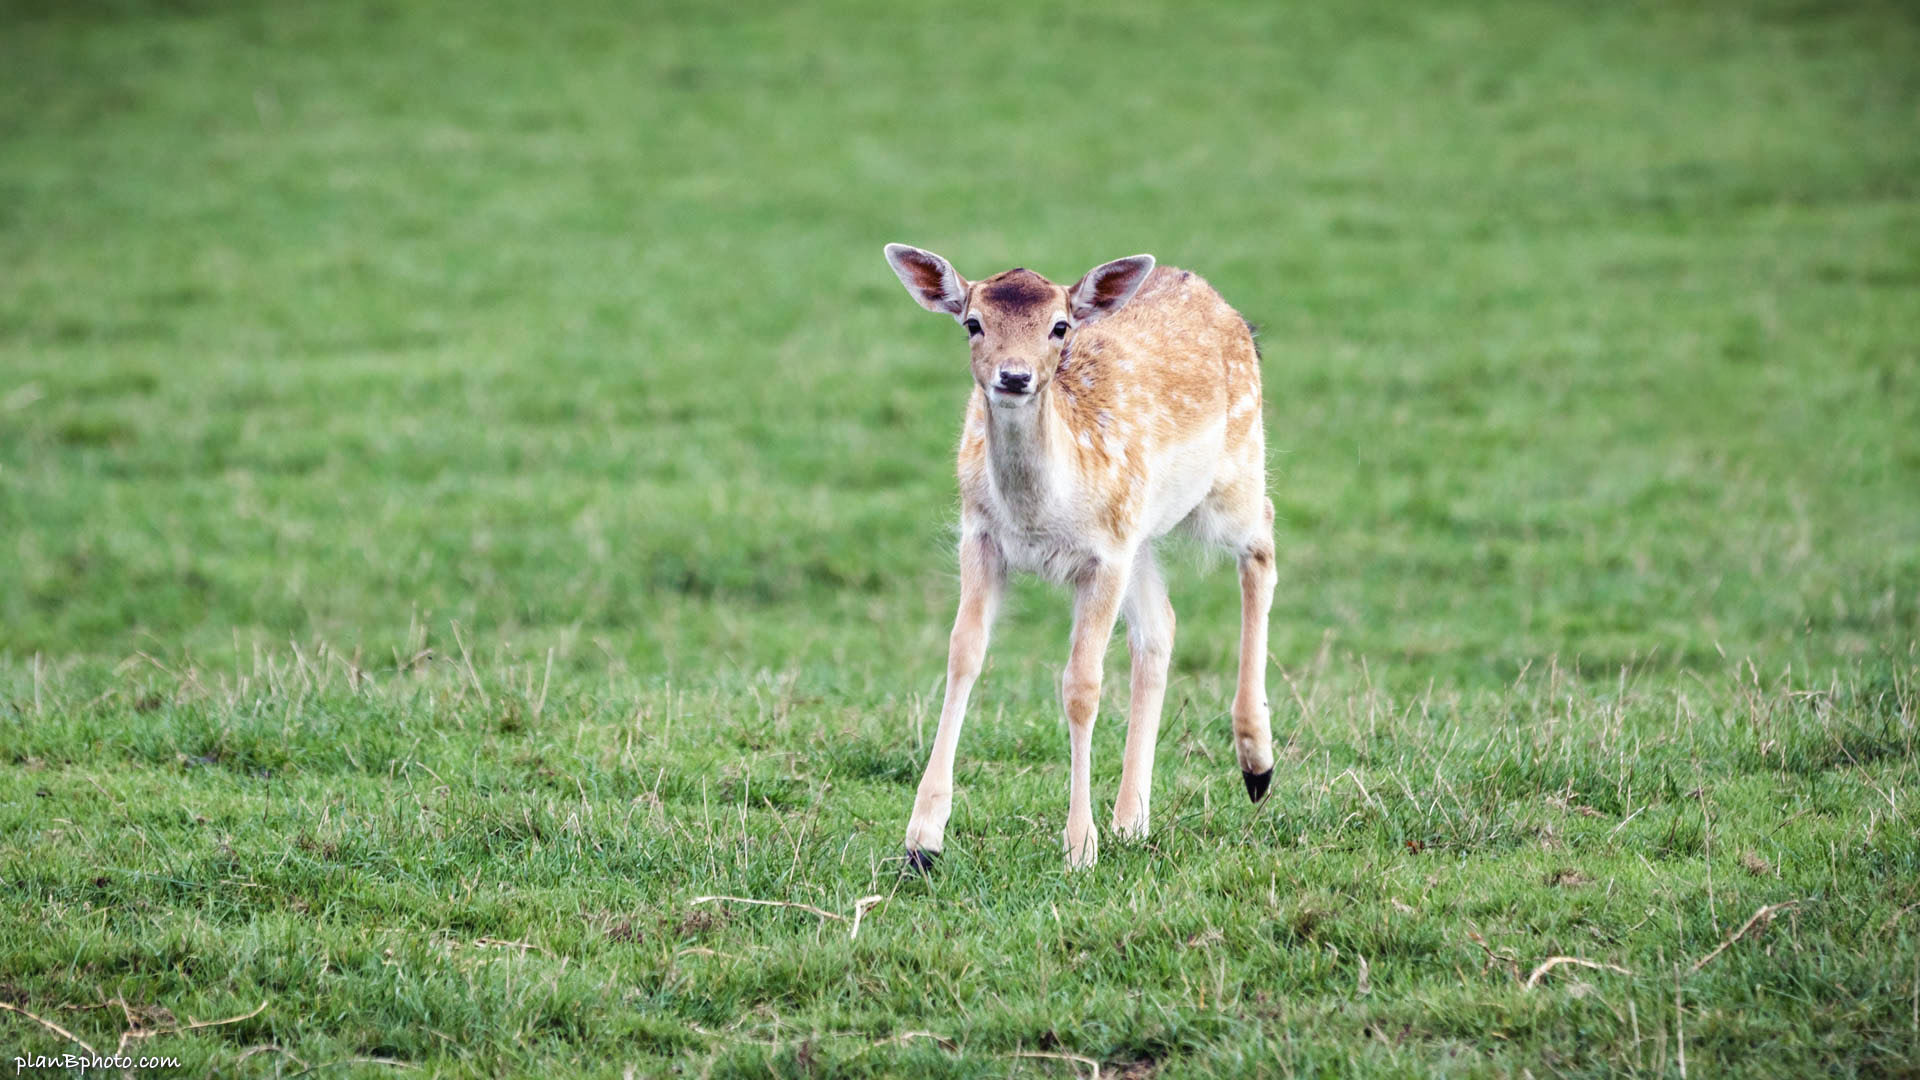 Young deer with white spots